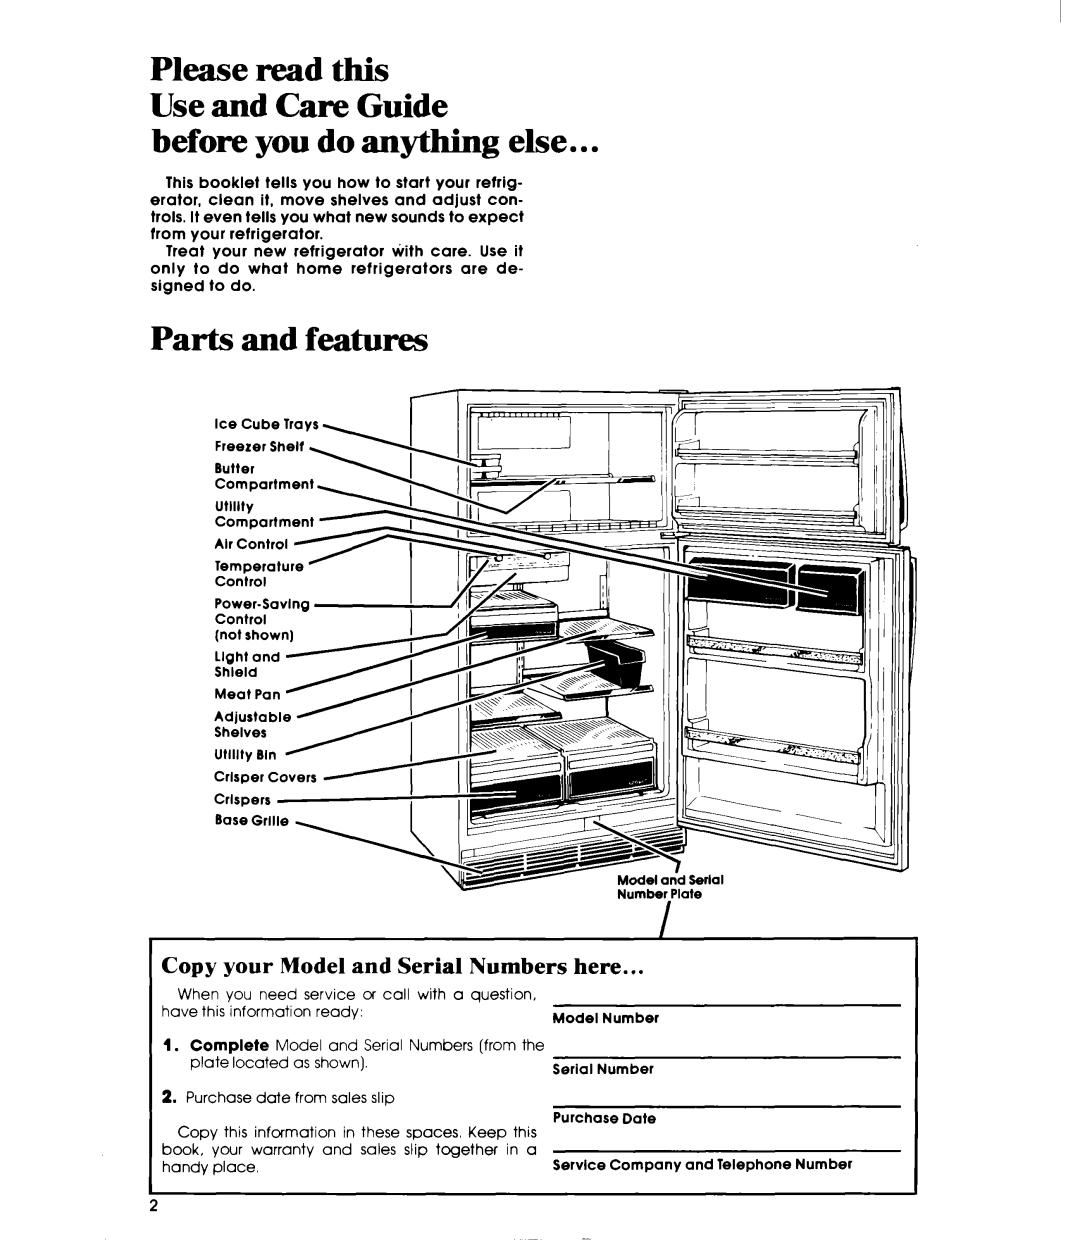 Whirlpool ETl7HK manual before you do anything else, Parts and features, Please read this Use and Care Guide 